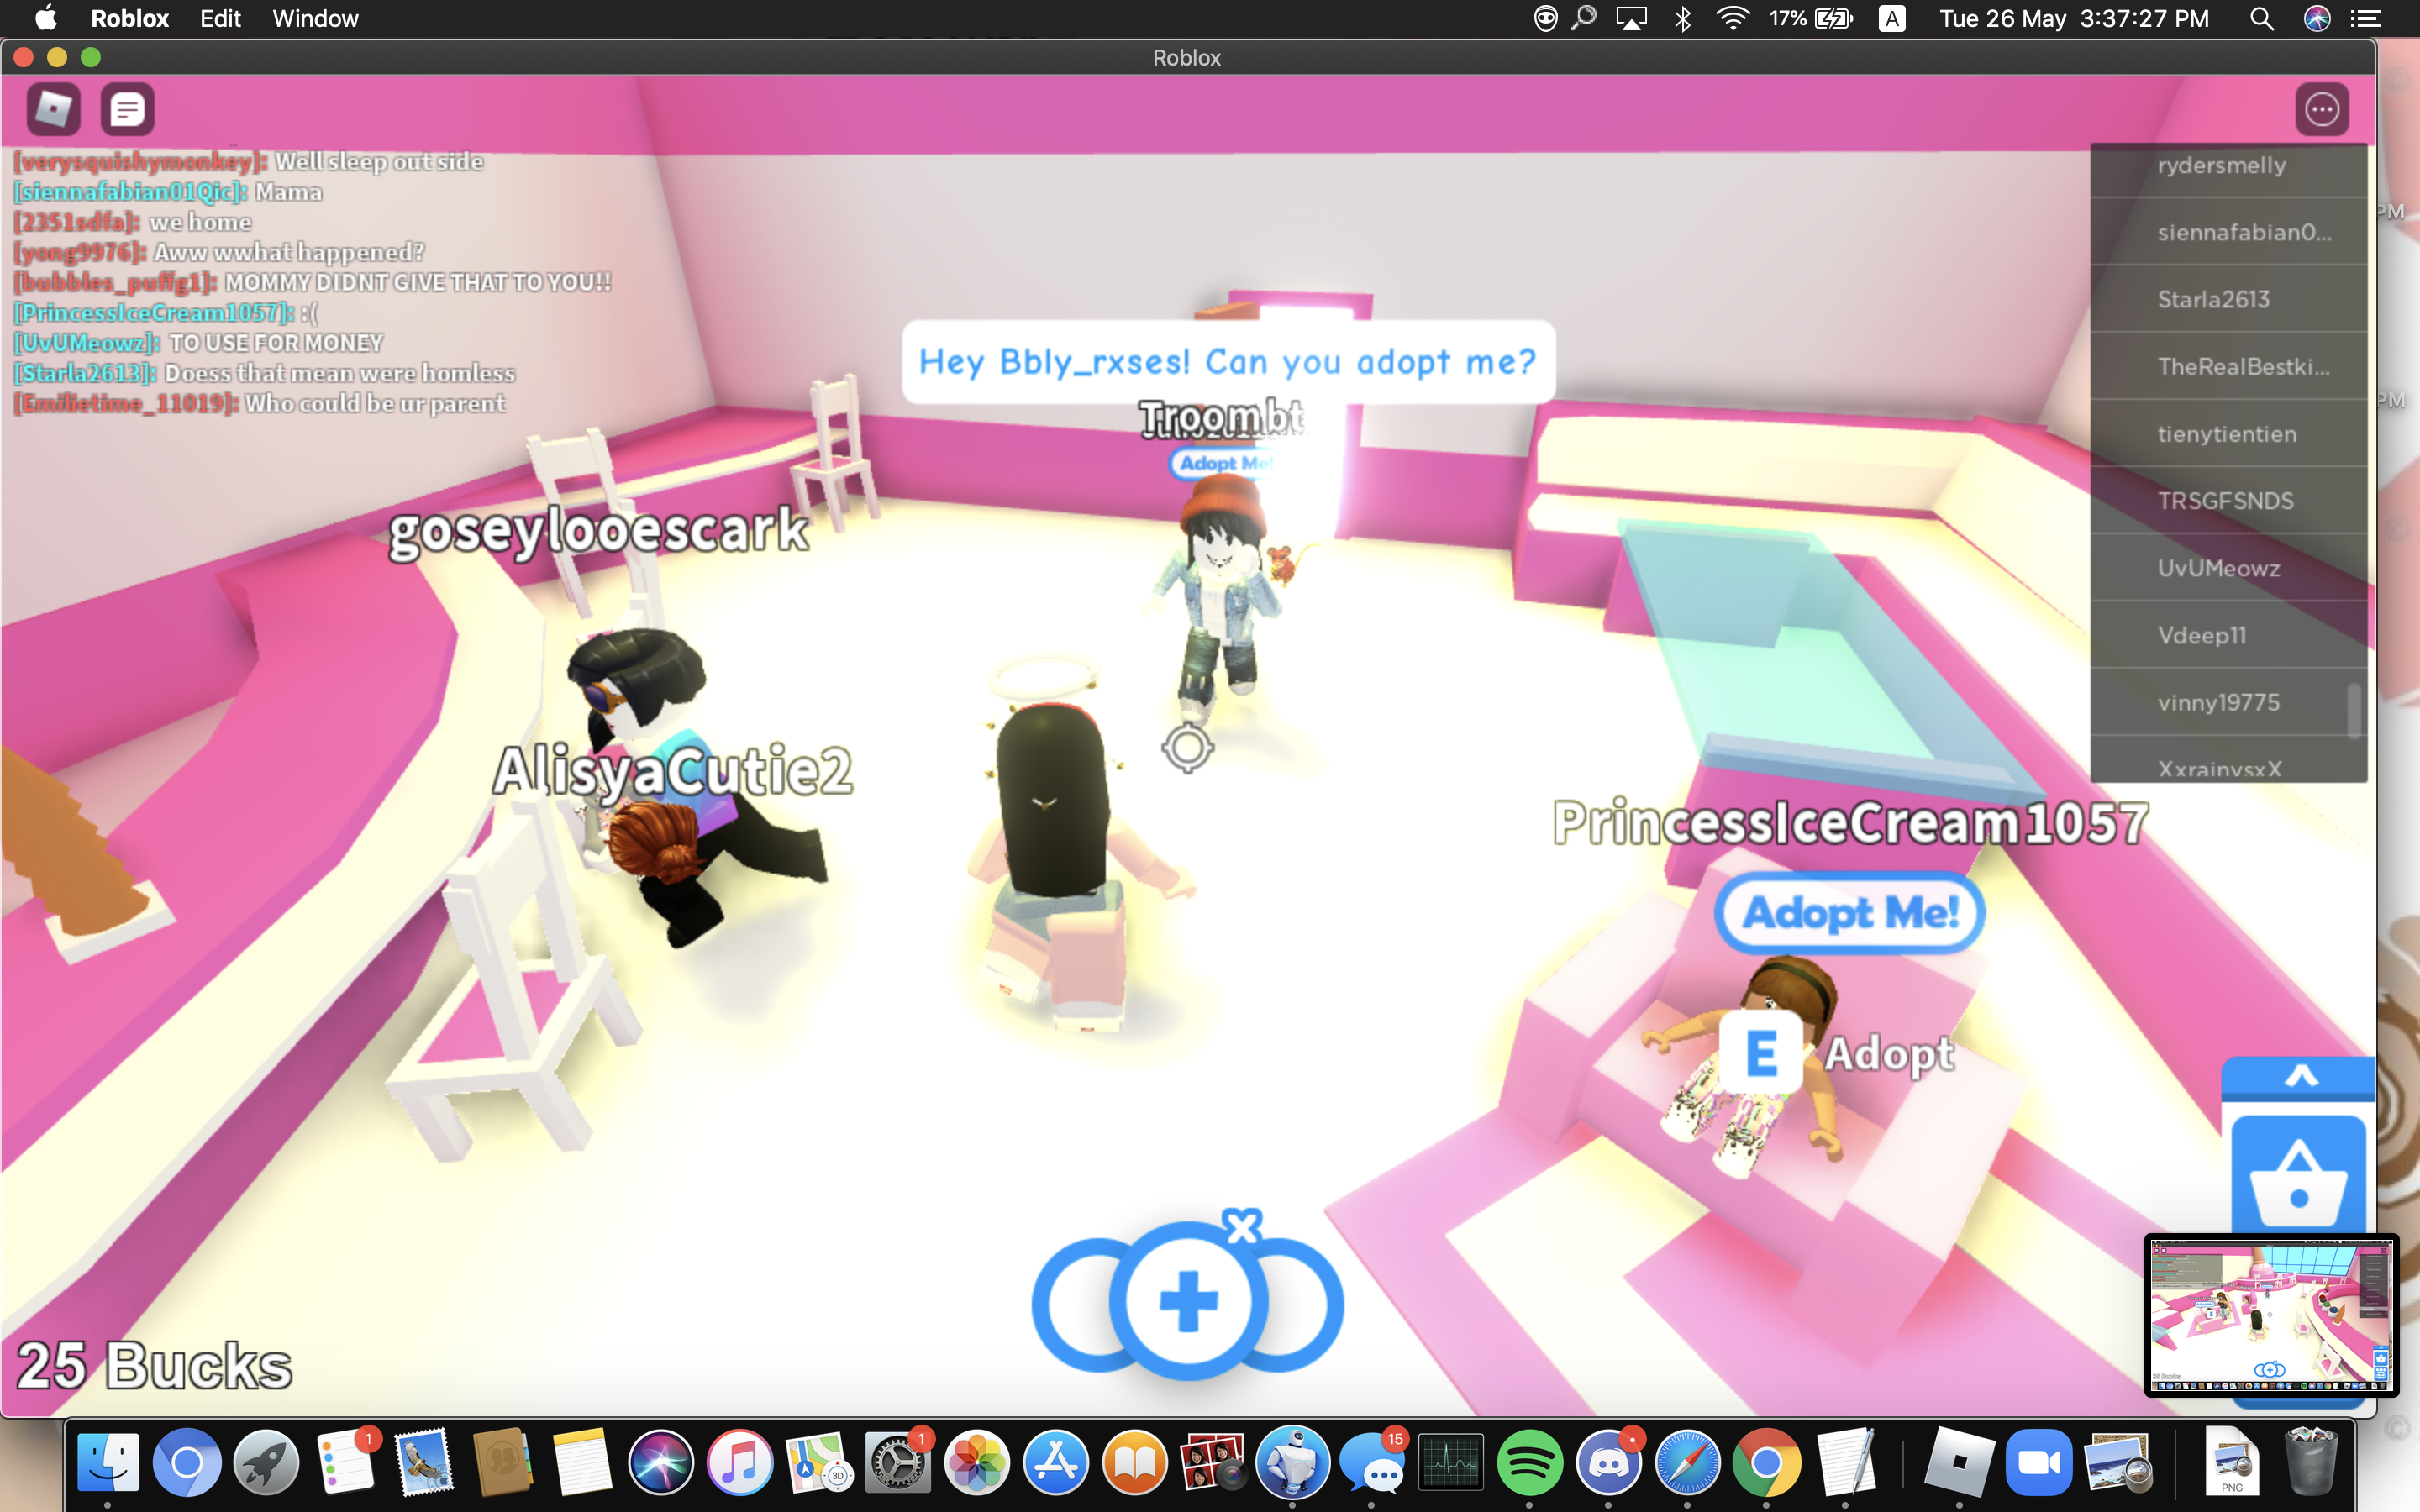 Went And Played Adopt Me Legacy D Link Below Fandom - roblox legacy font